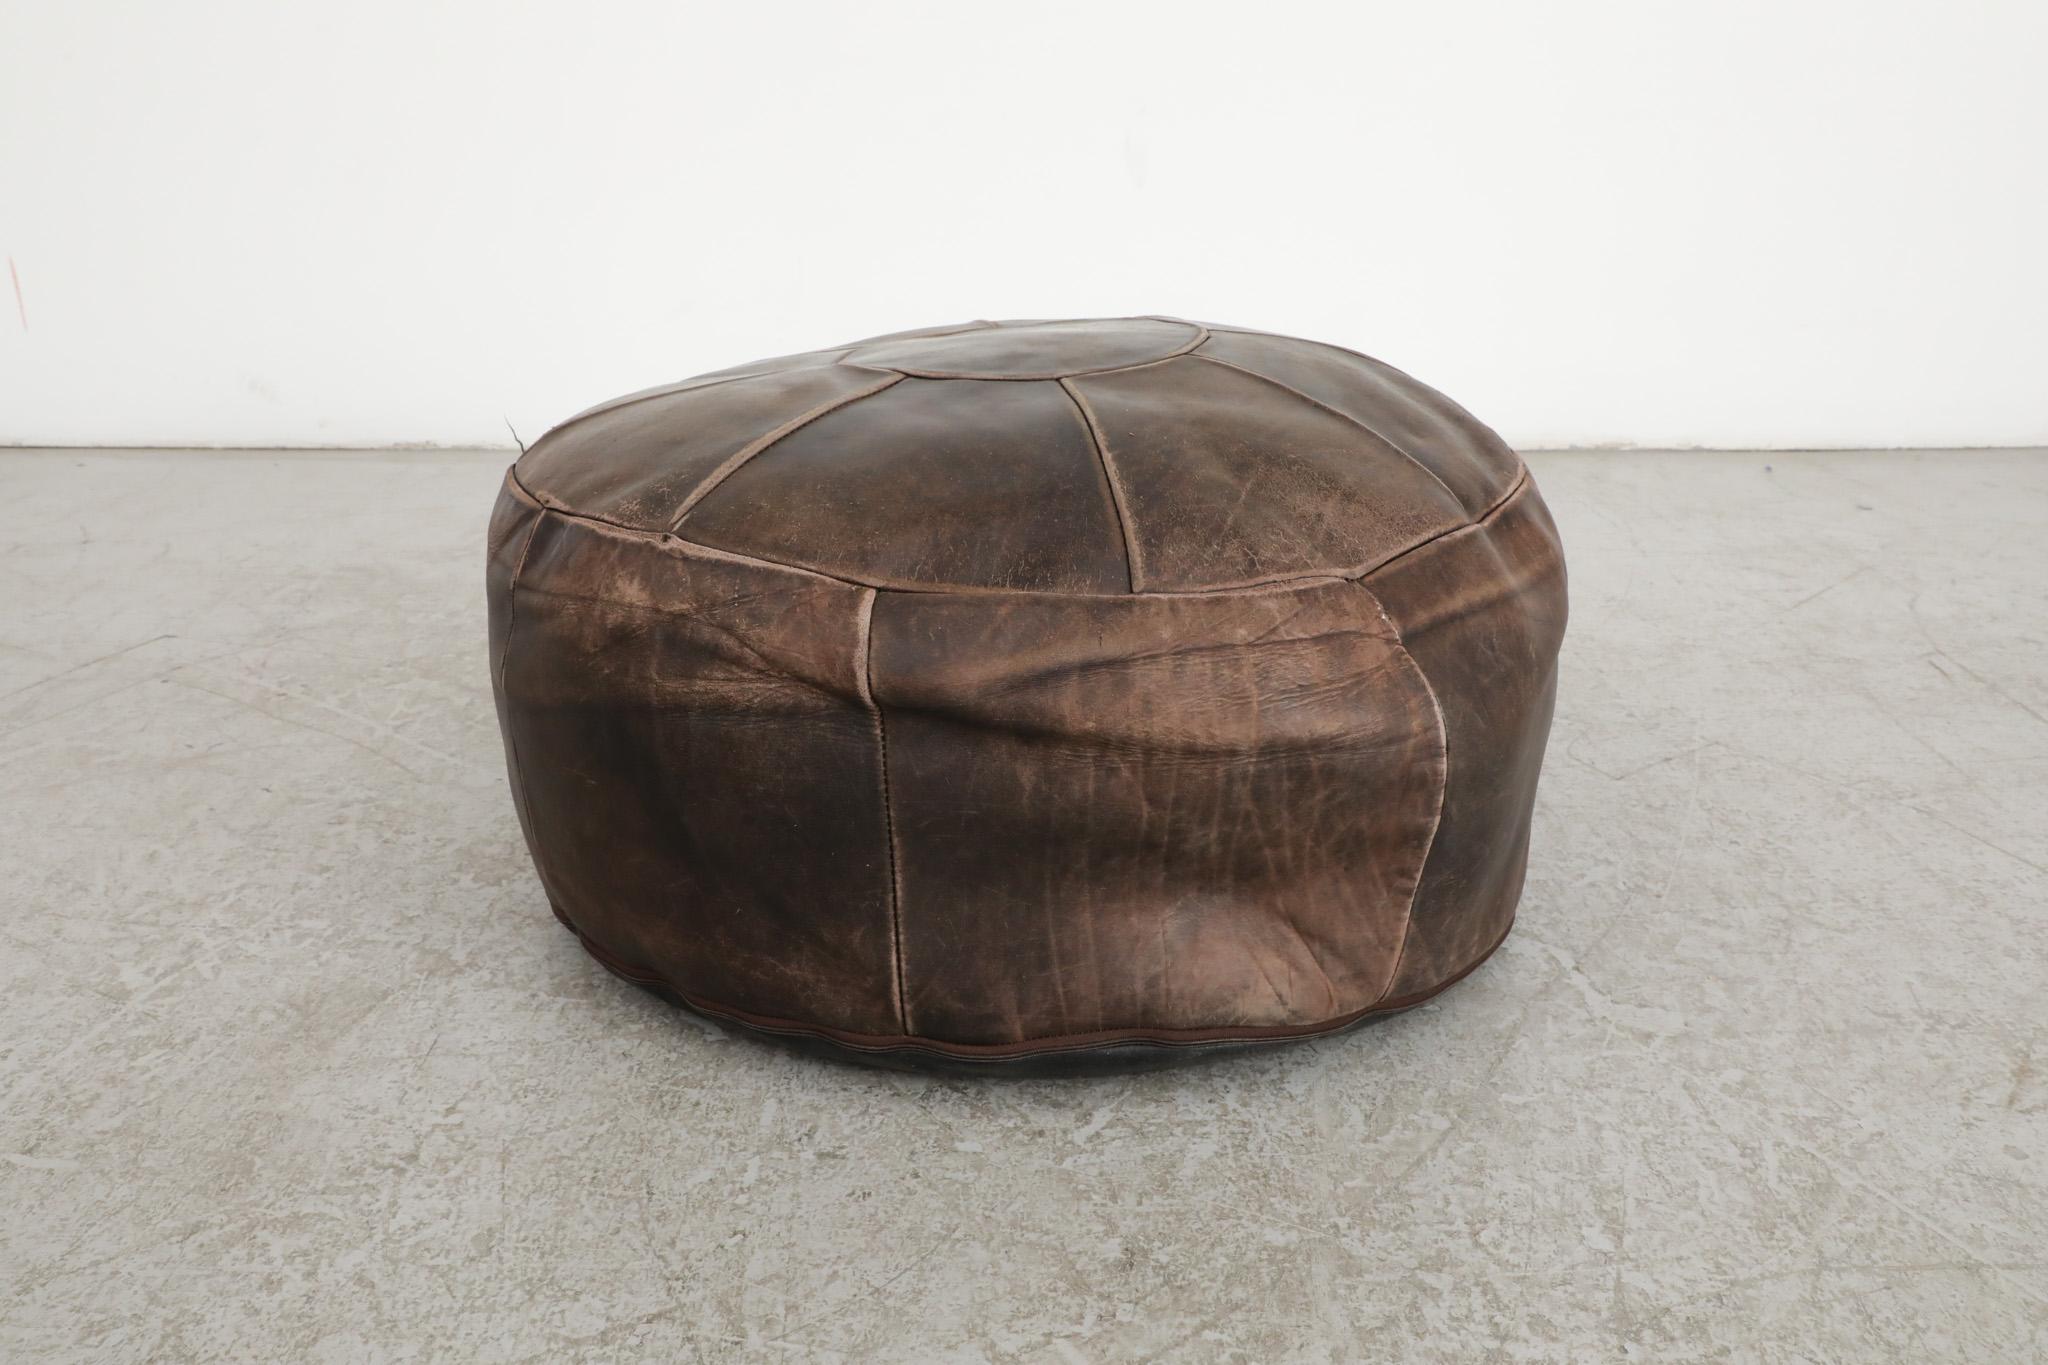 Mid-Century, De Sede Inspired leather patchwork ottoman. Its sturdy and comfortable soft form frame in original condition with some visible wear and light patina, all consistent with its age and use.